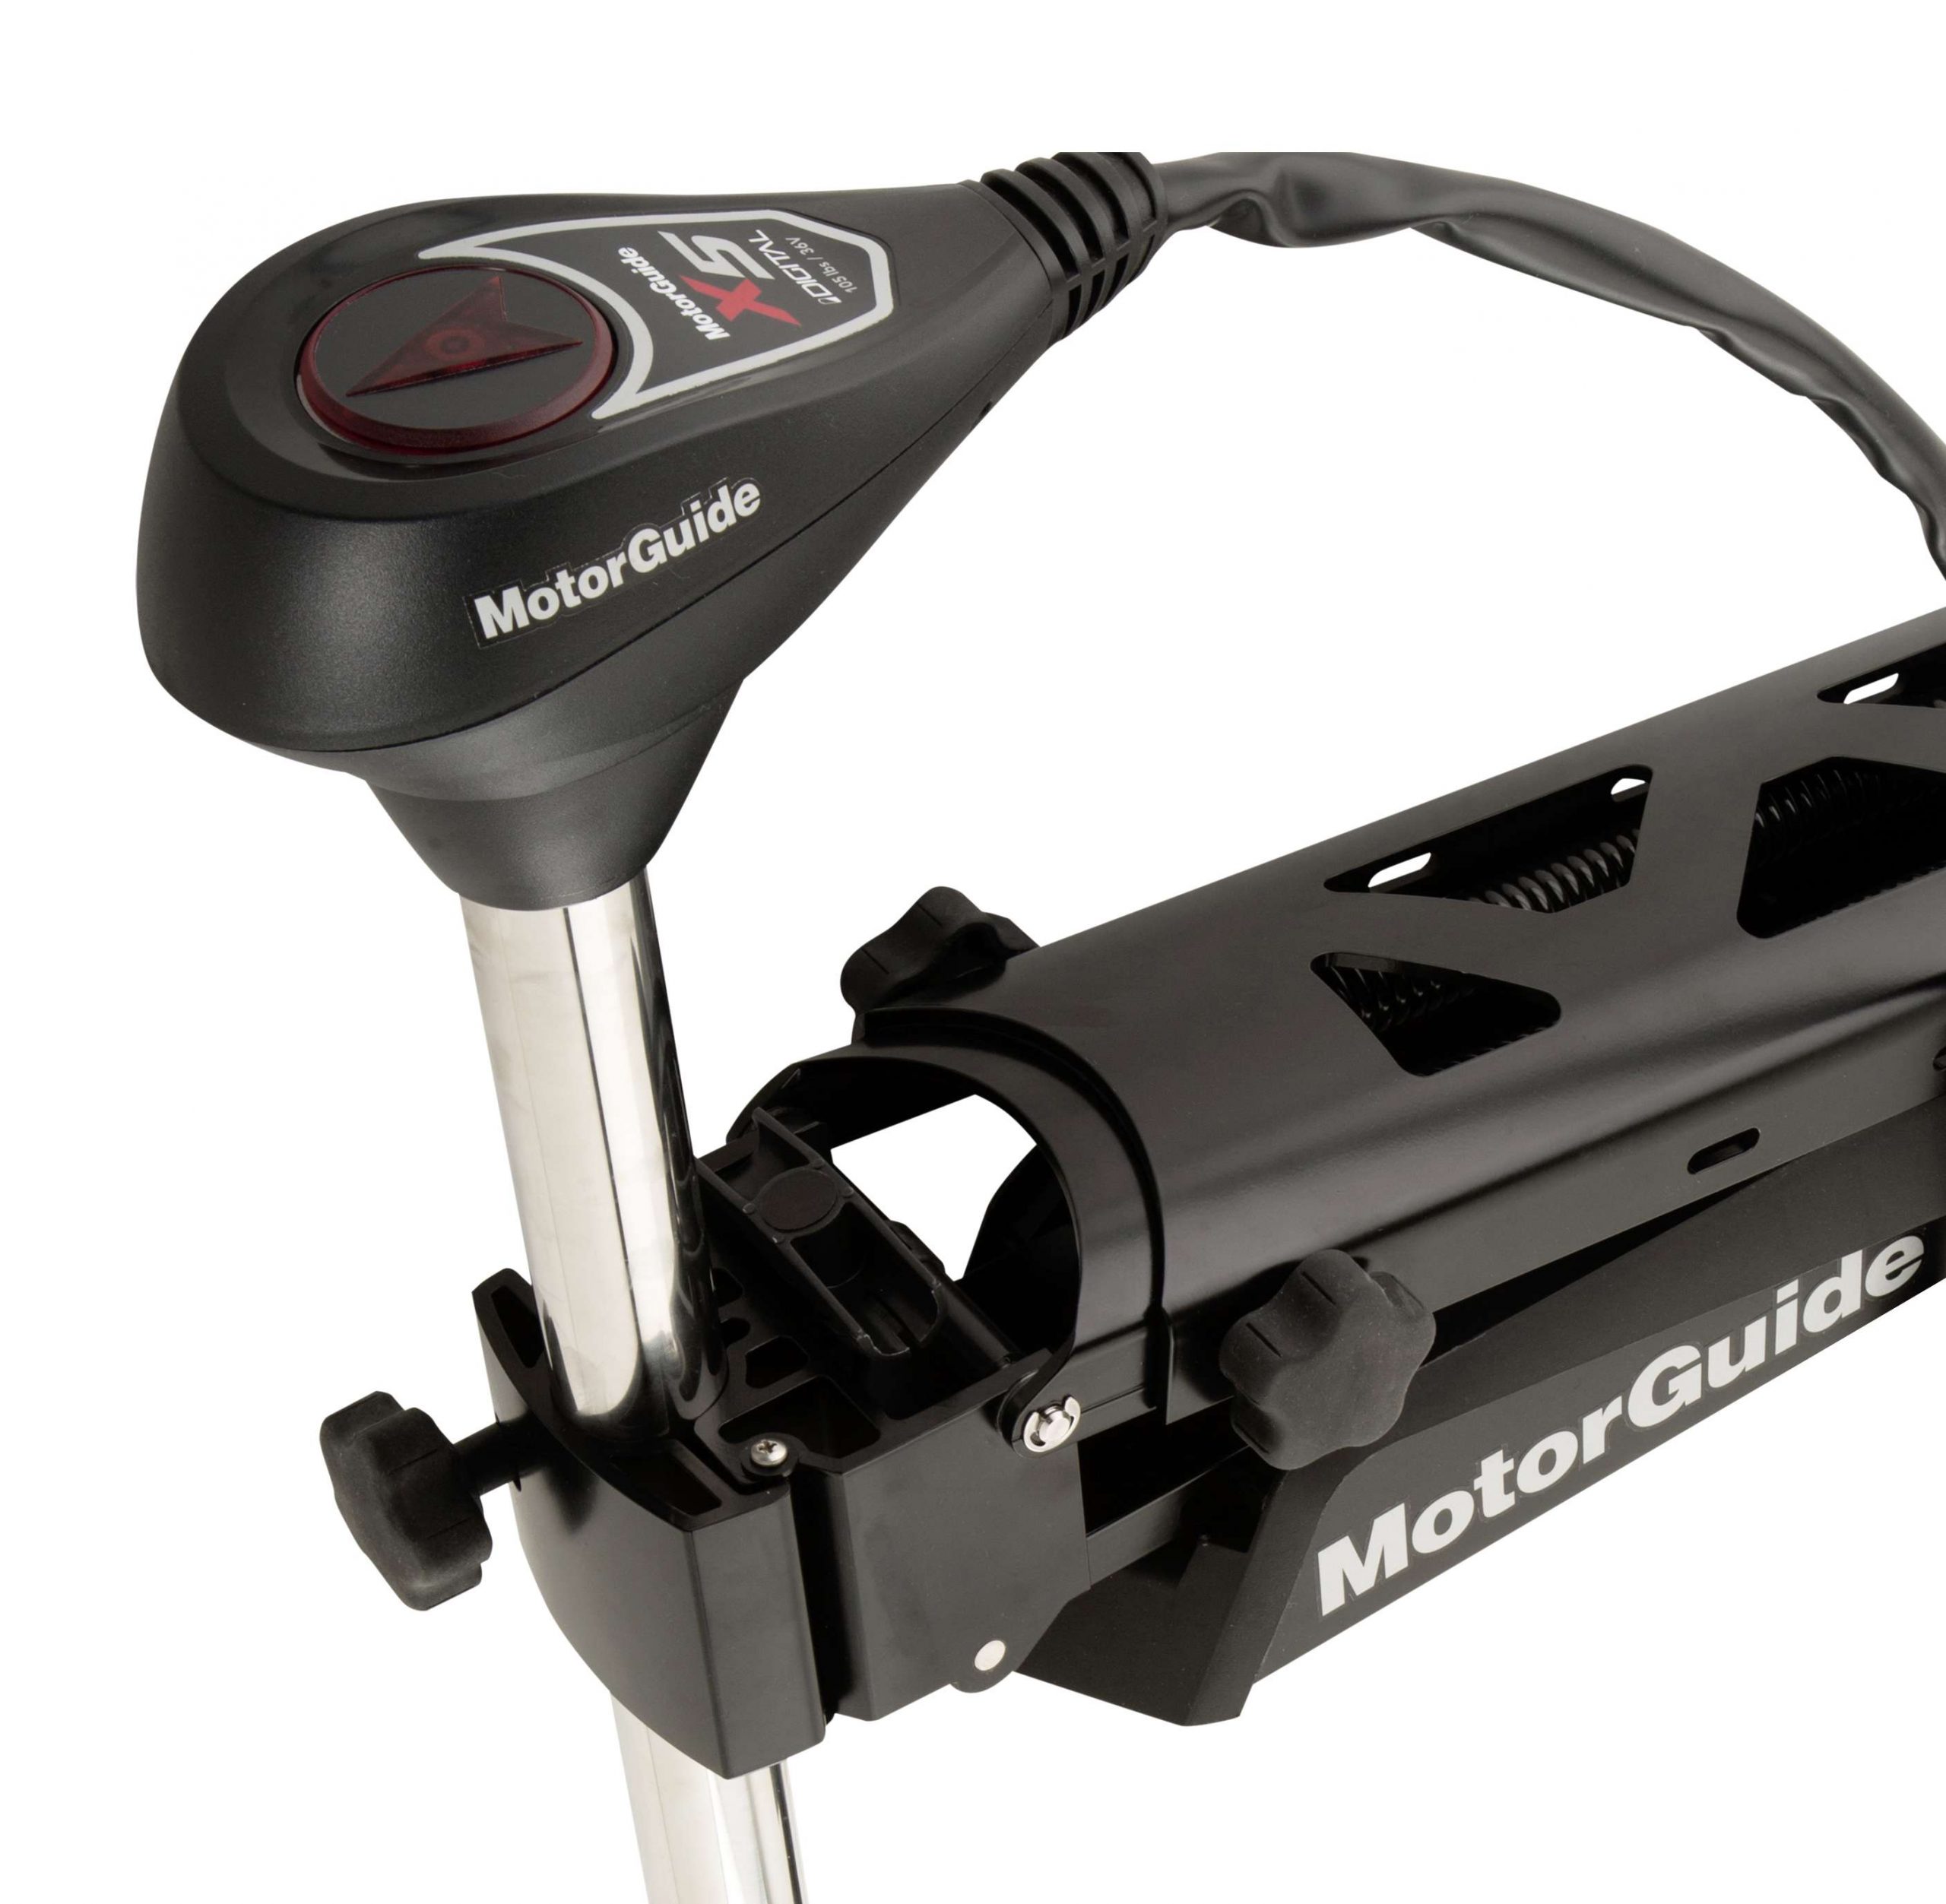 <b>Motorguide</b><br>	X5<br>	Here's the latest from Motorguide, which will be on KVD's boat ASAP. The new X5 with its patented Variable Ratio Steering (VRS) technology puts anglers in control to precisely maneuver in tight spots where trophies hide. VRS enables subtle and precise steering adjustments and virtually eliminates torque steering feedback that can compromise boat stability and control. And with its oversized stainless steel outer shaft, composite inner shaft and wide breakaway mount, the X5 stands up to the demands of tournament fishing. Plus, digital power management technology is standard.